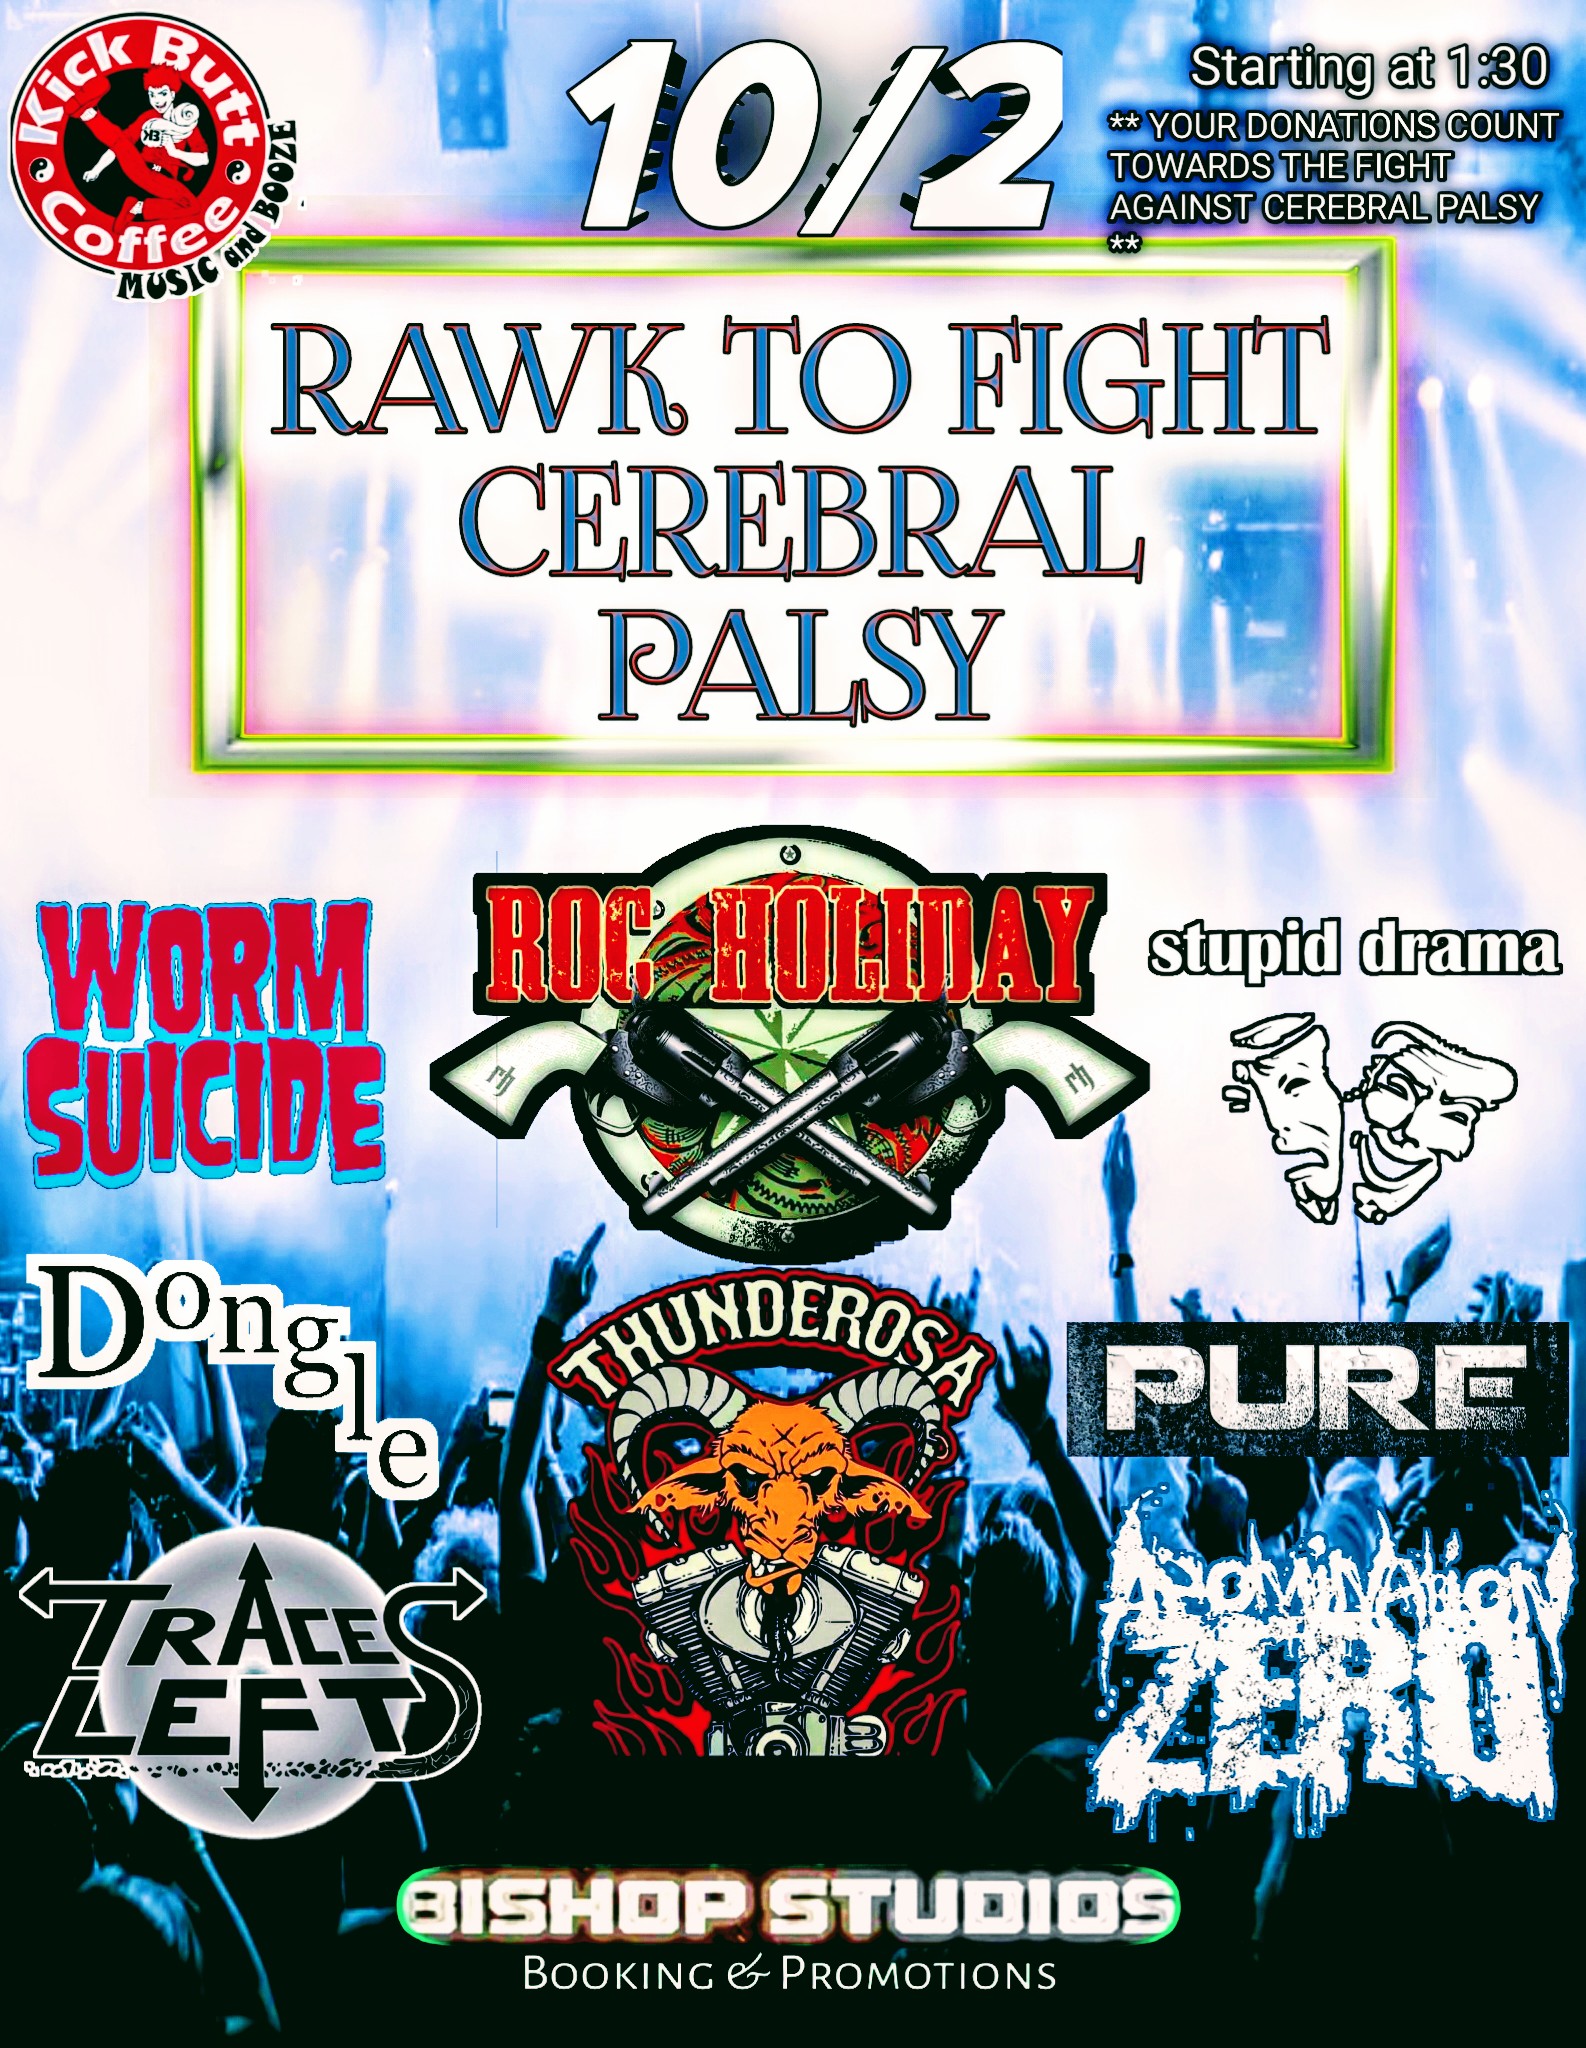 RAWK TO FIGHT CEREBRAL PALSY